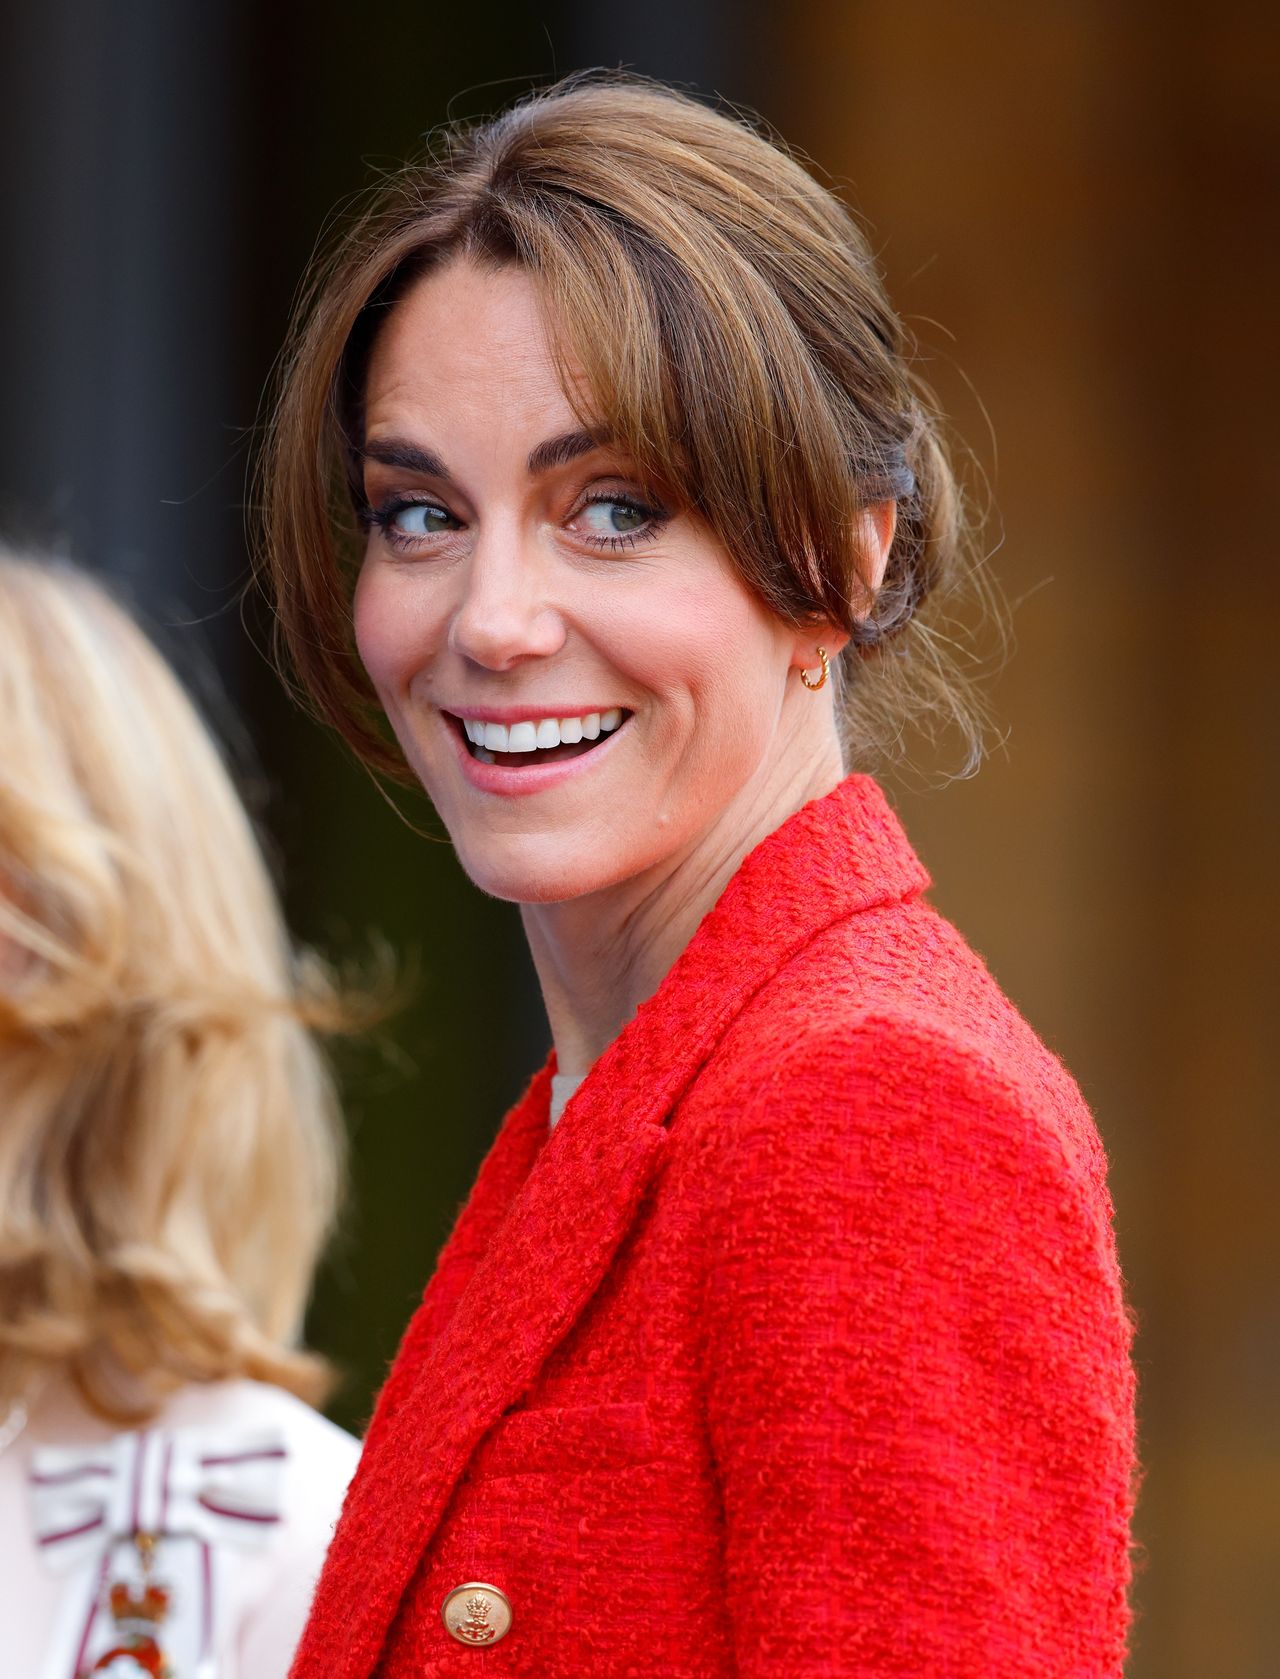 Kate Middleton in a new hairstyle